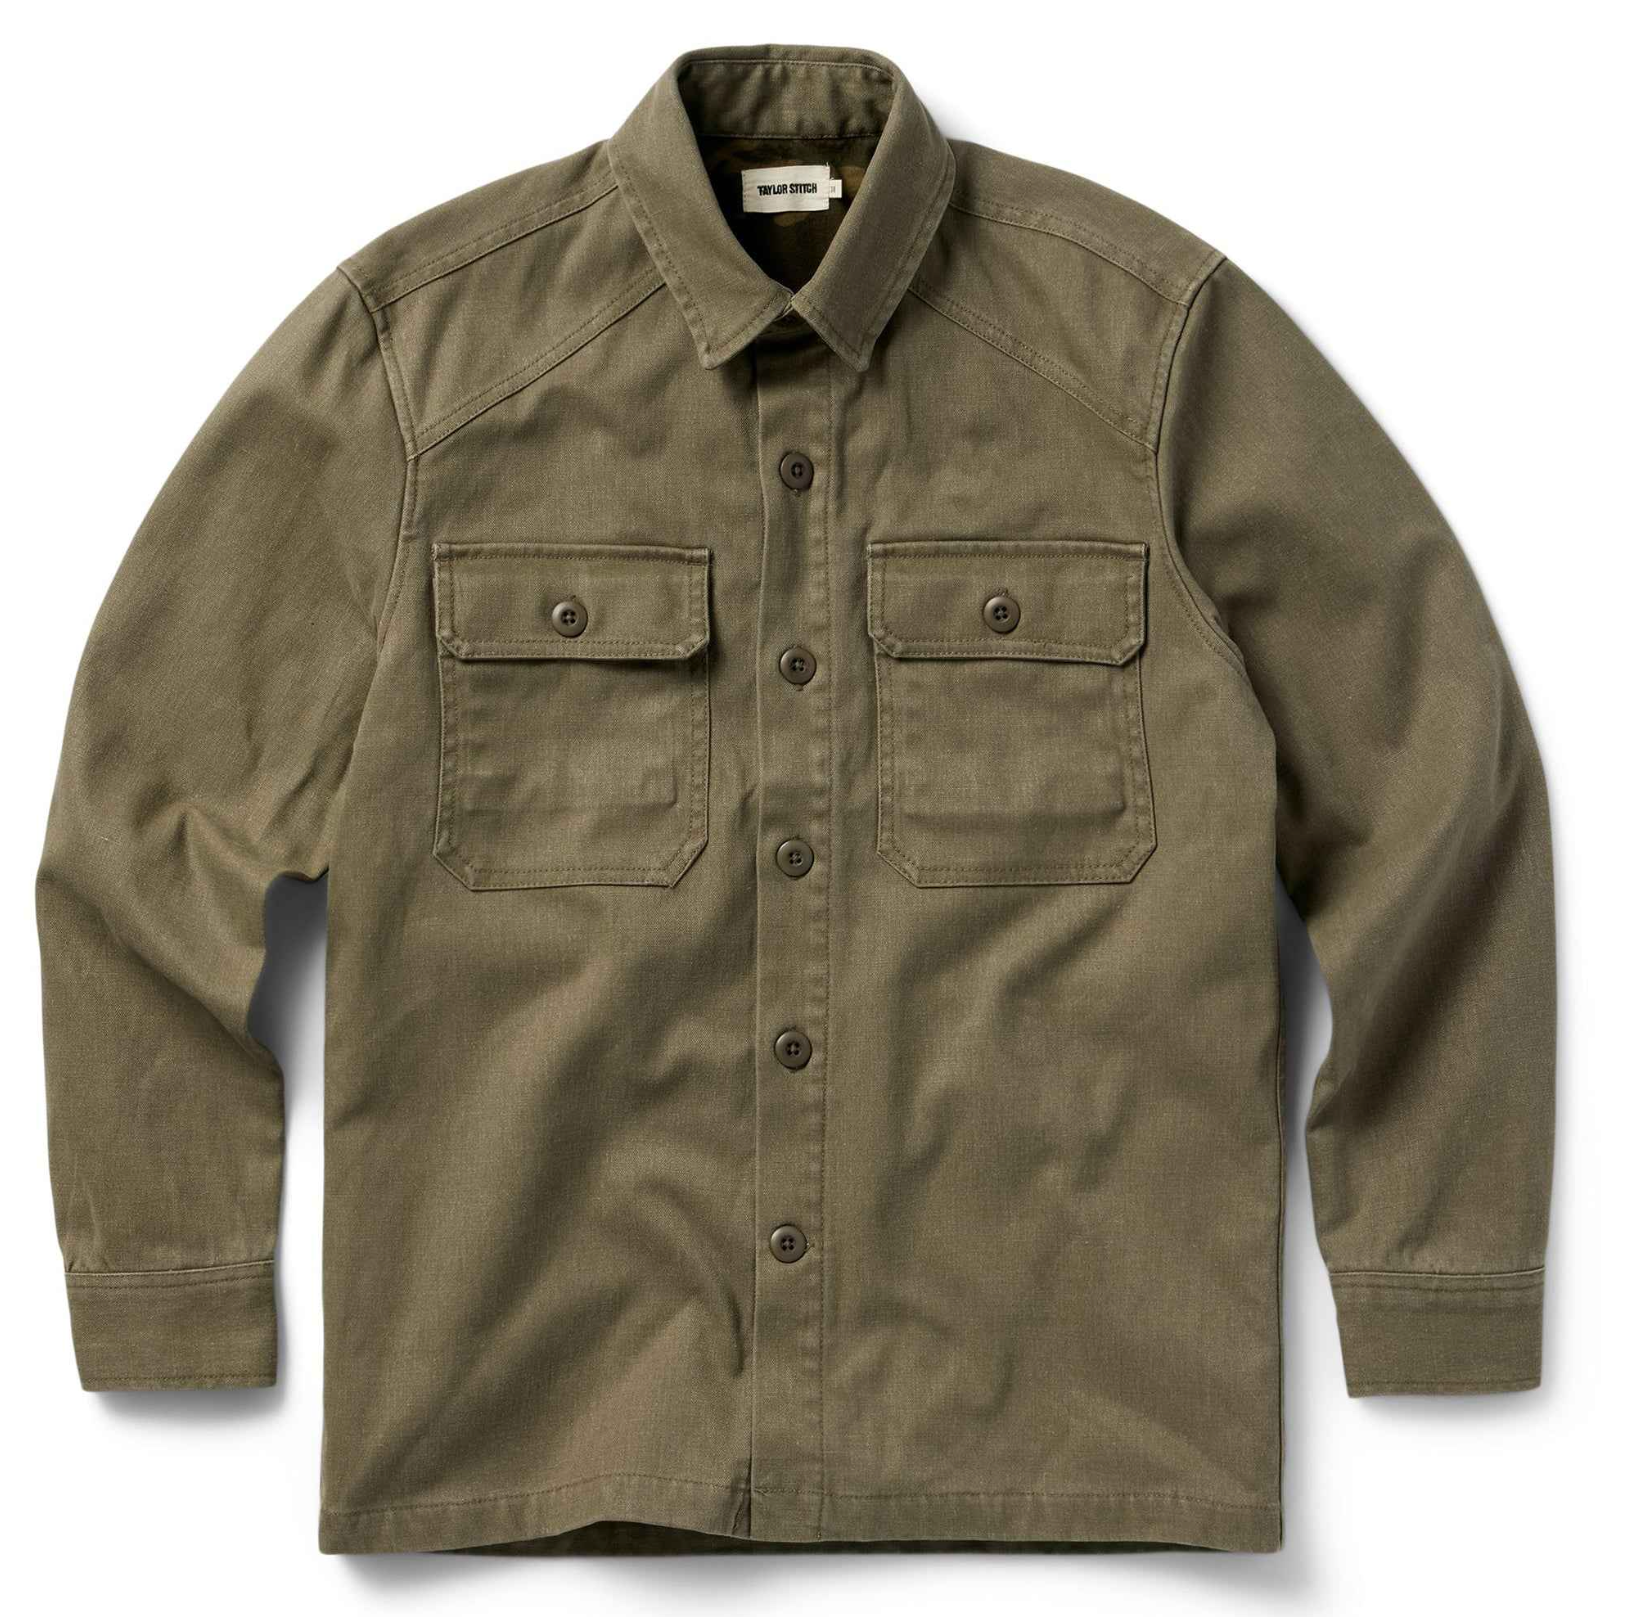 Taylor Stitch Lined Shop Shirt in Stone Boss Duck